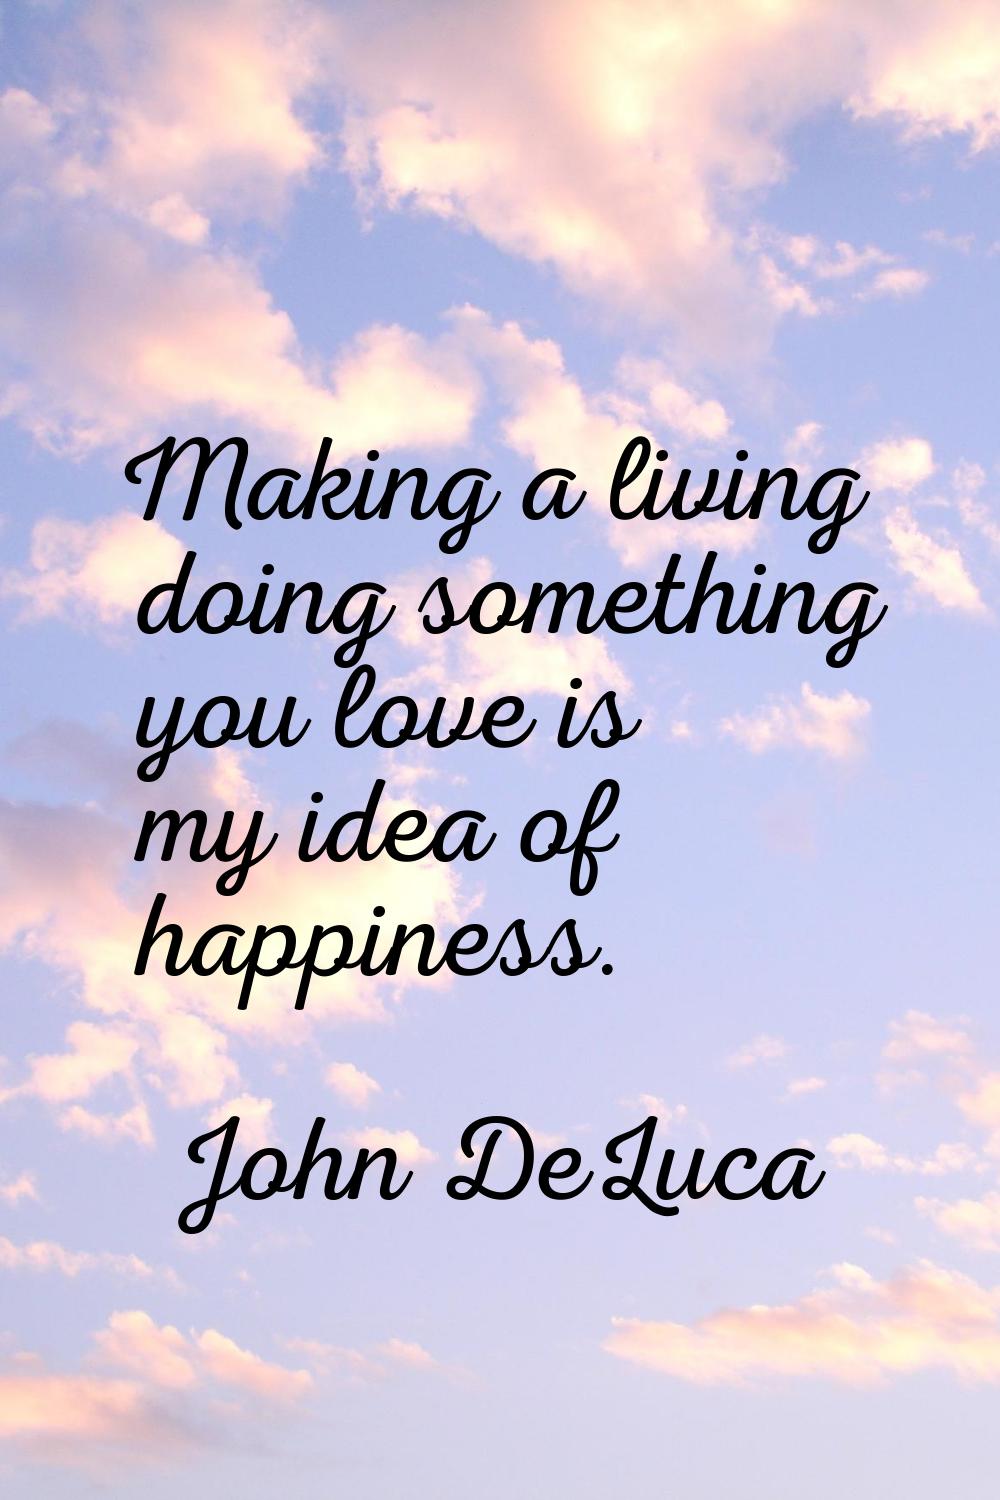 Making a living doing something you love is my idea of happiness.